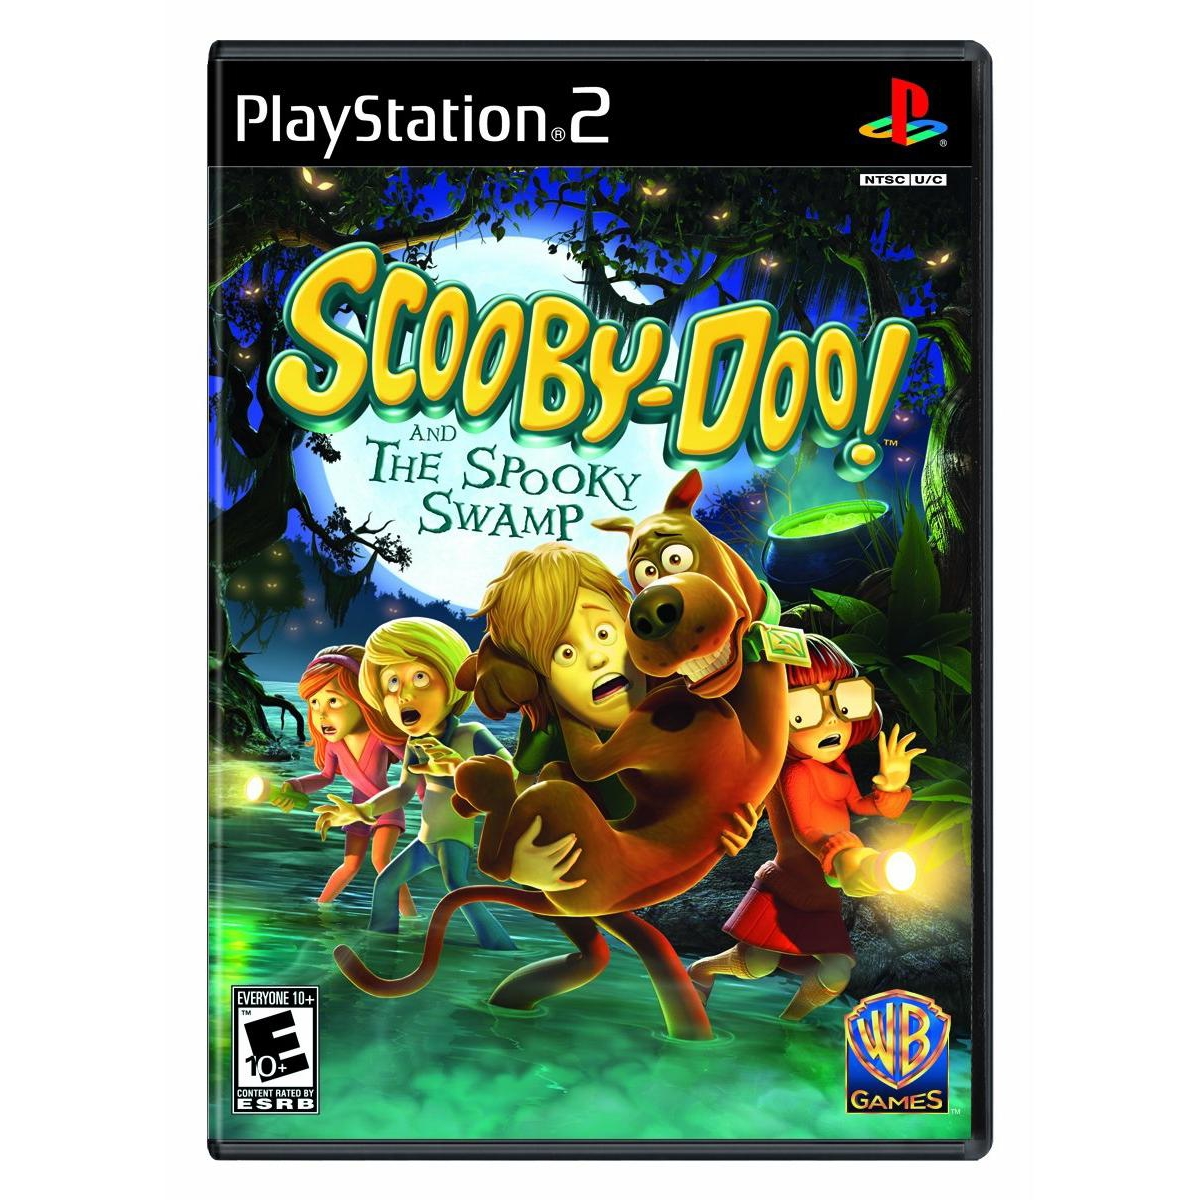 Warner Bros Scooby Doo And The Spooky Swamp - Playstation 2 In Open Miscellaneous